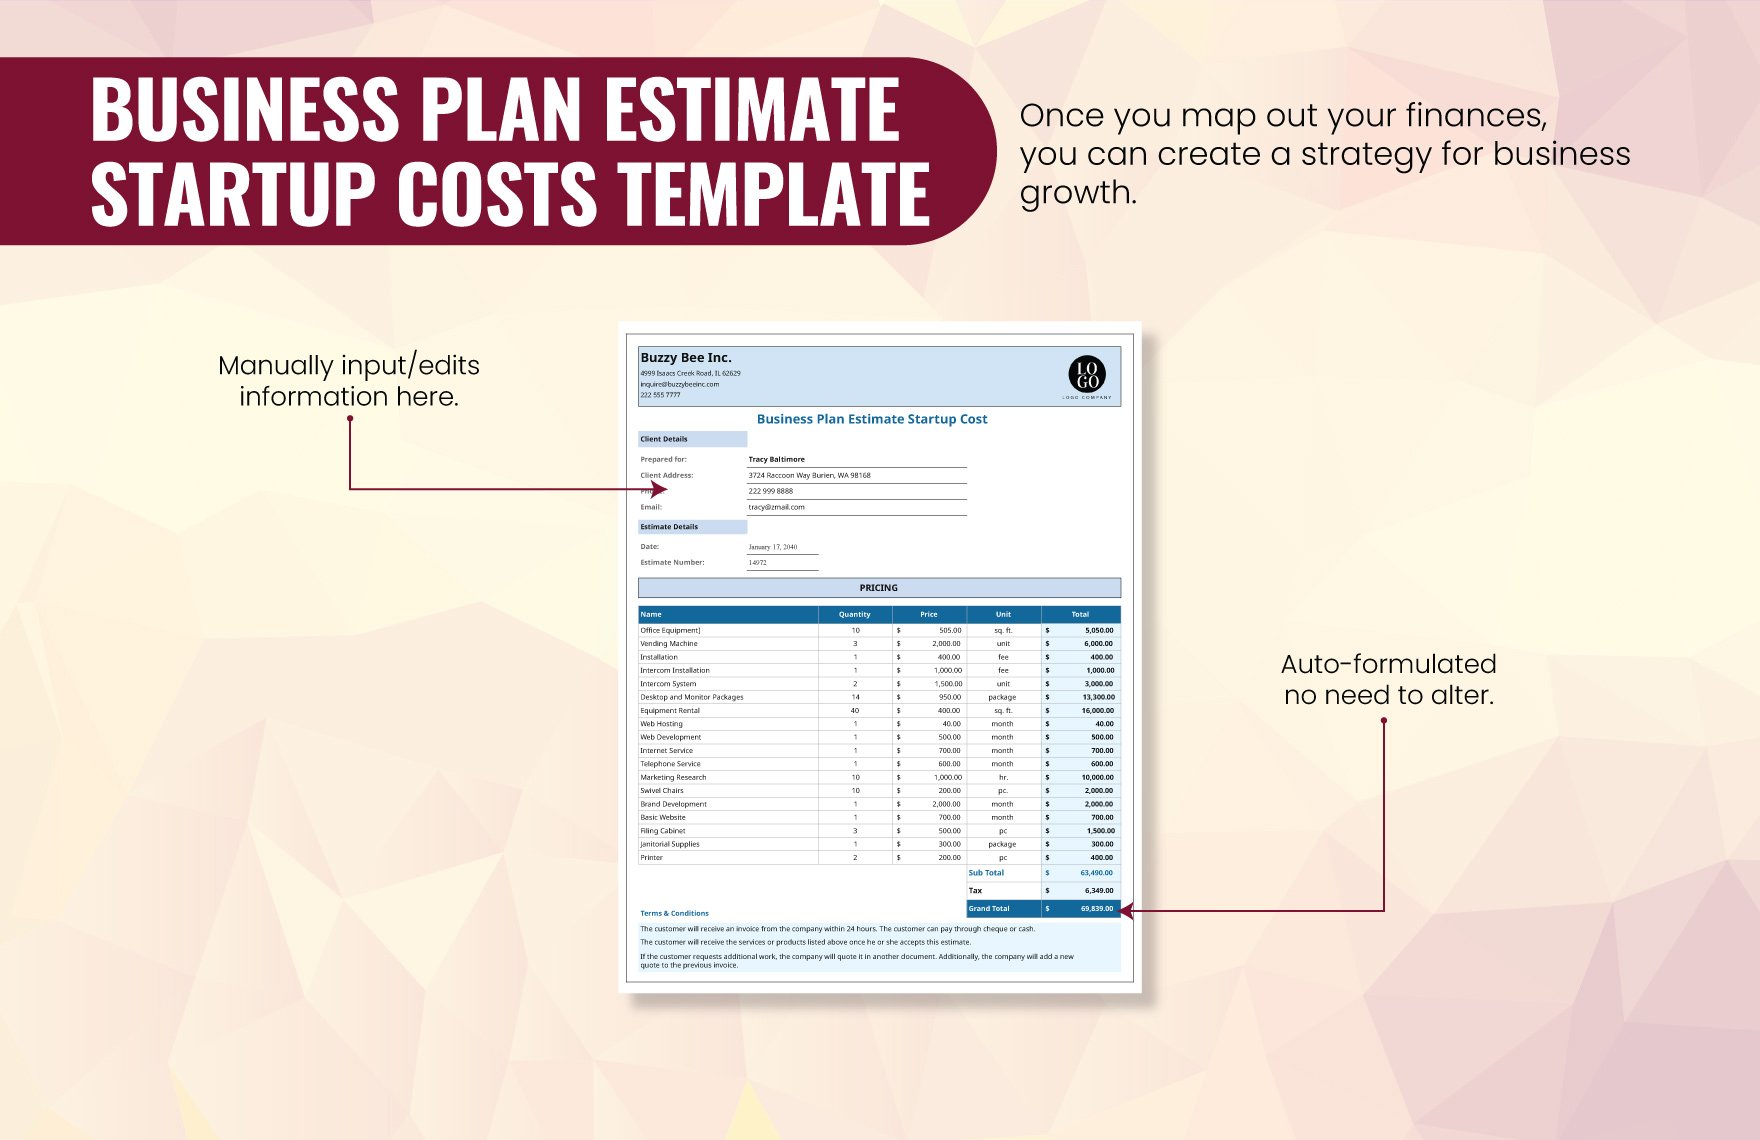 Business Plan Estimate Startup Costs Template